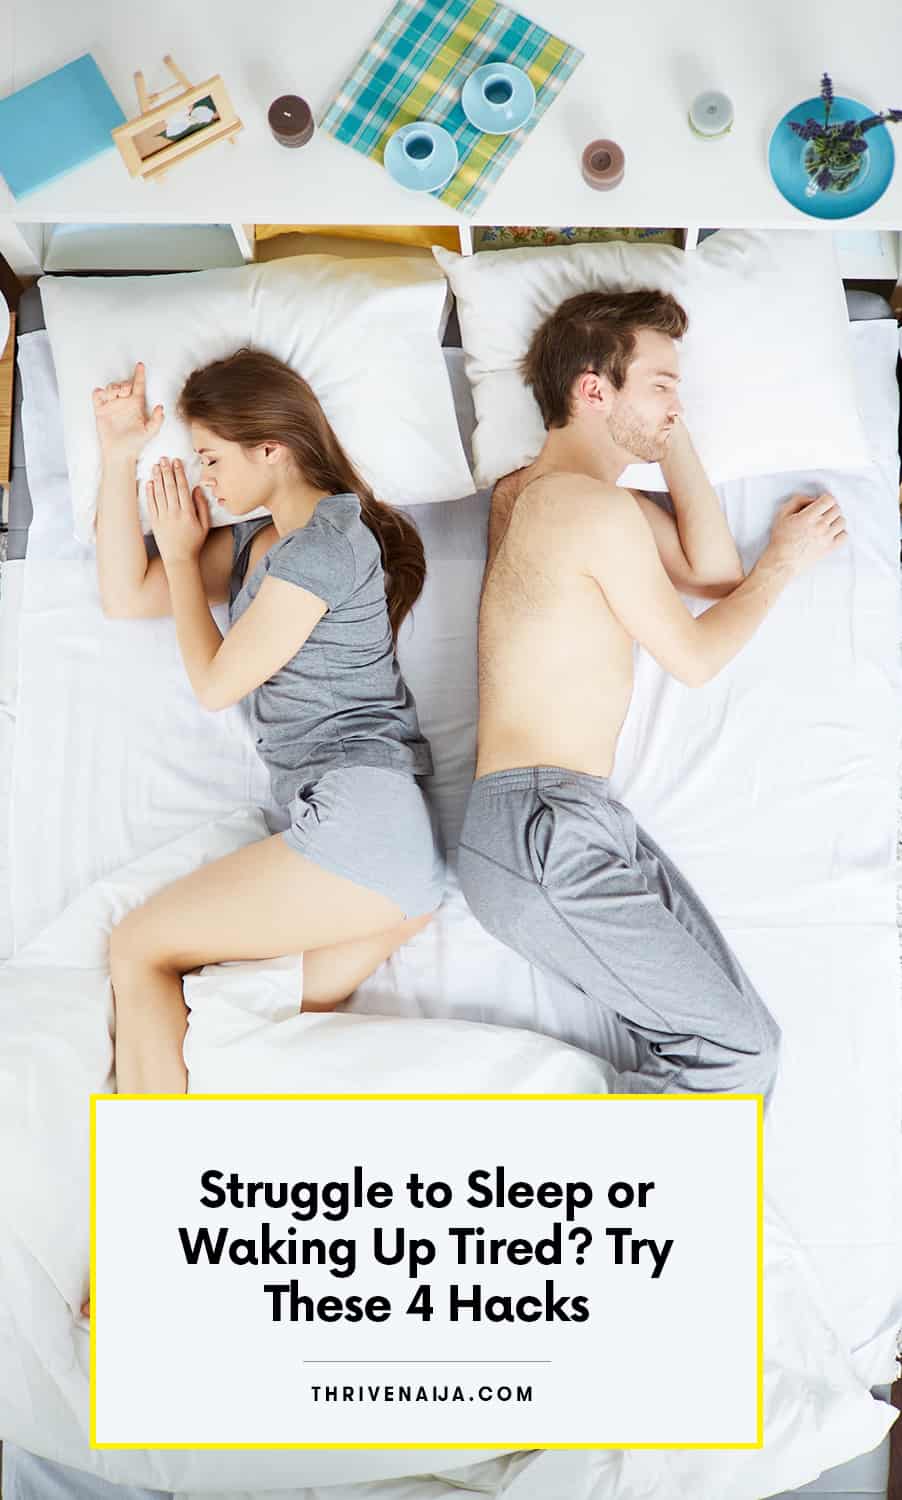 Struggling to sleep? Try these 4 easy hacks